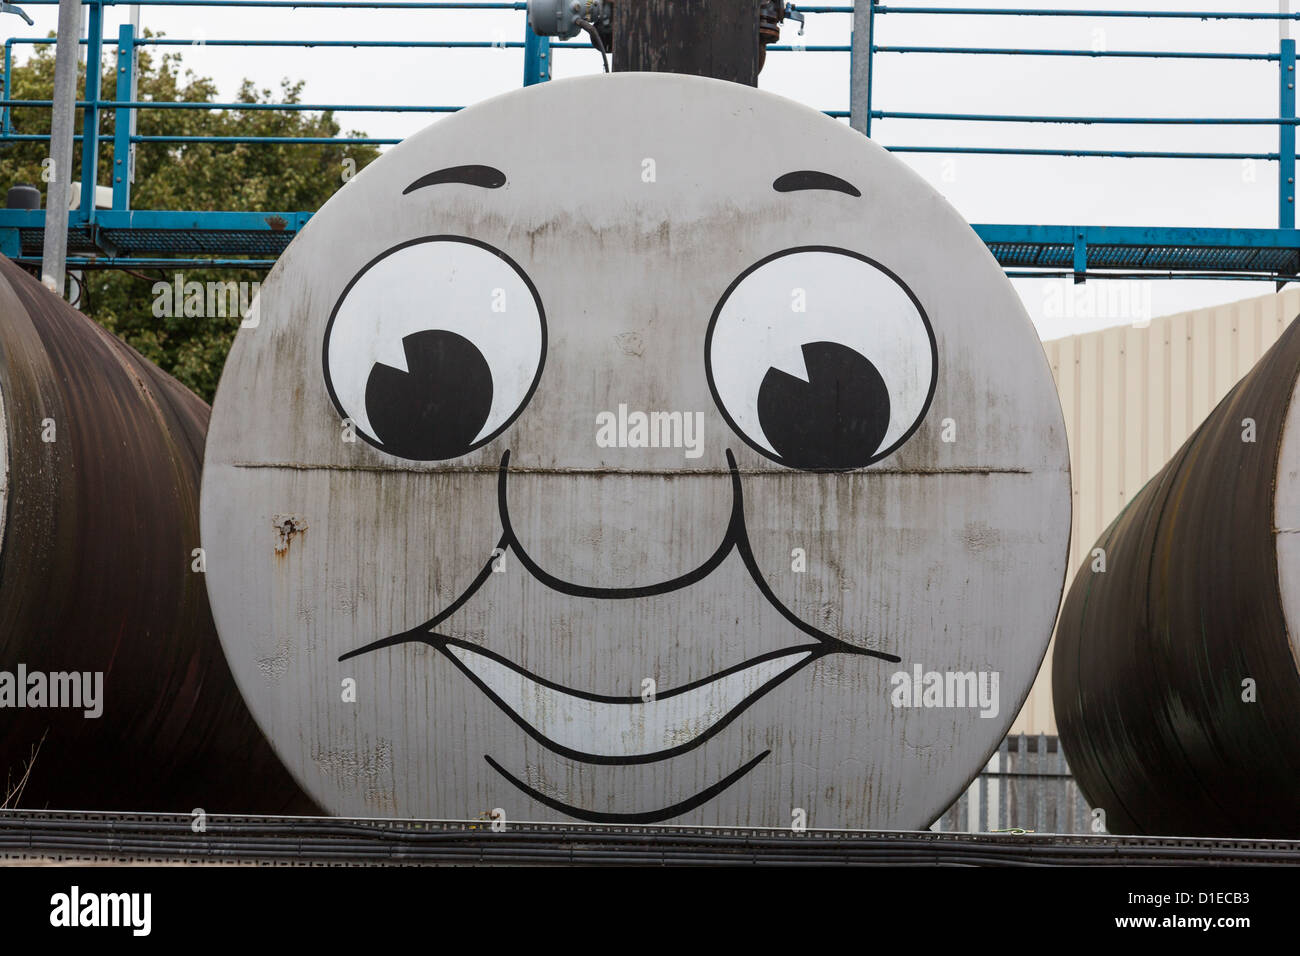 Storage tank with amusing 'Thomas the Tank Engine' face painted on it. Stock Photo